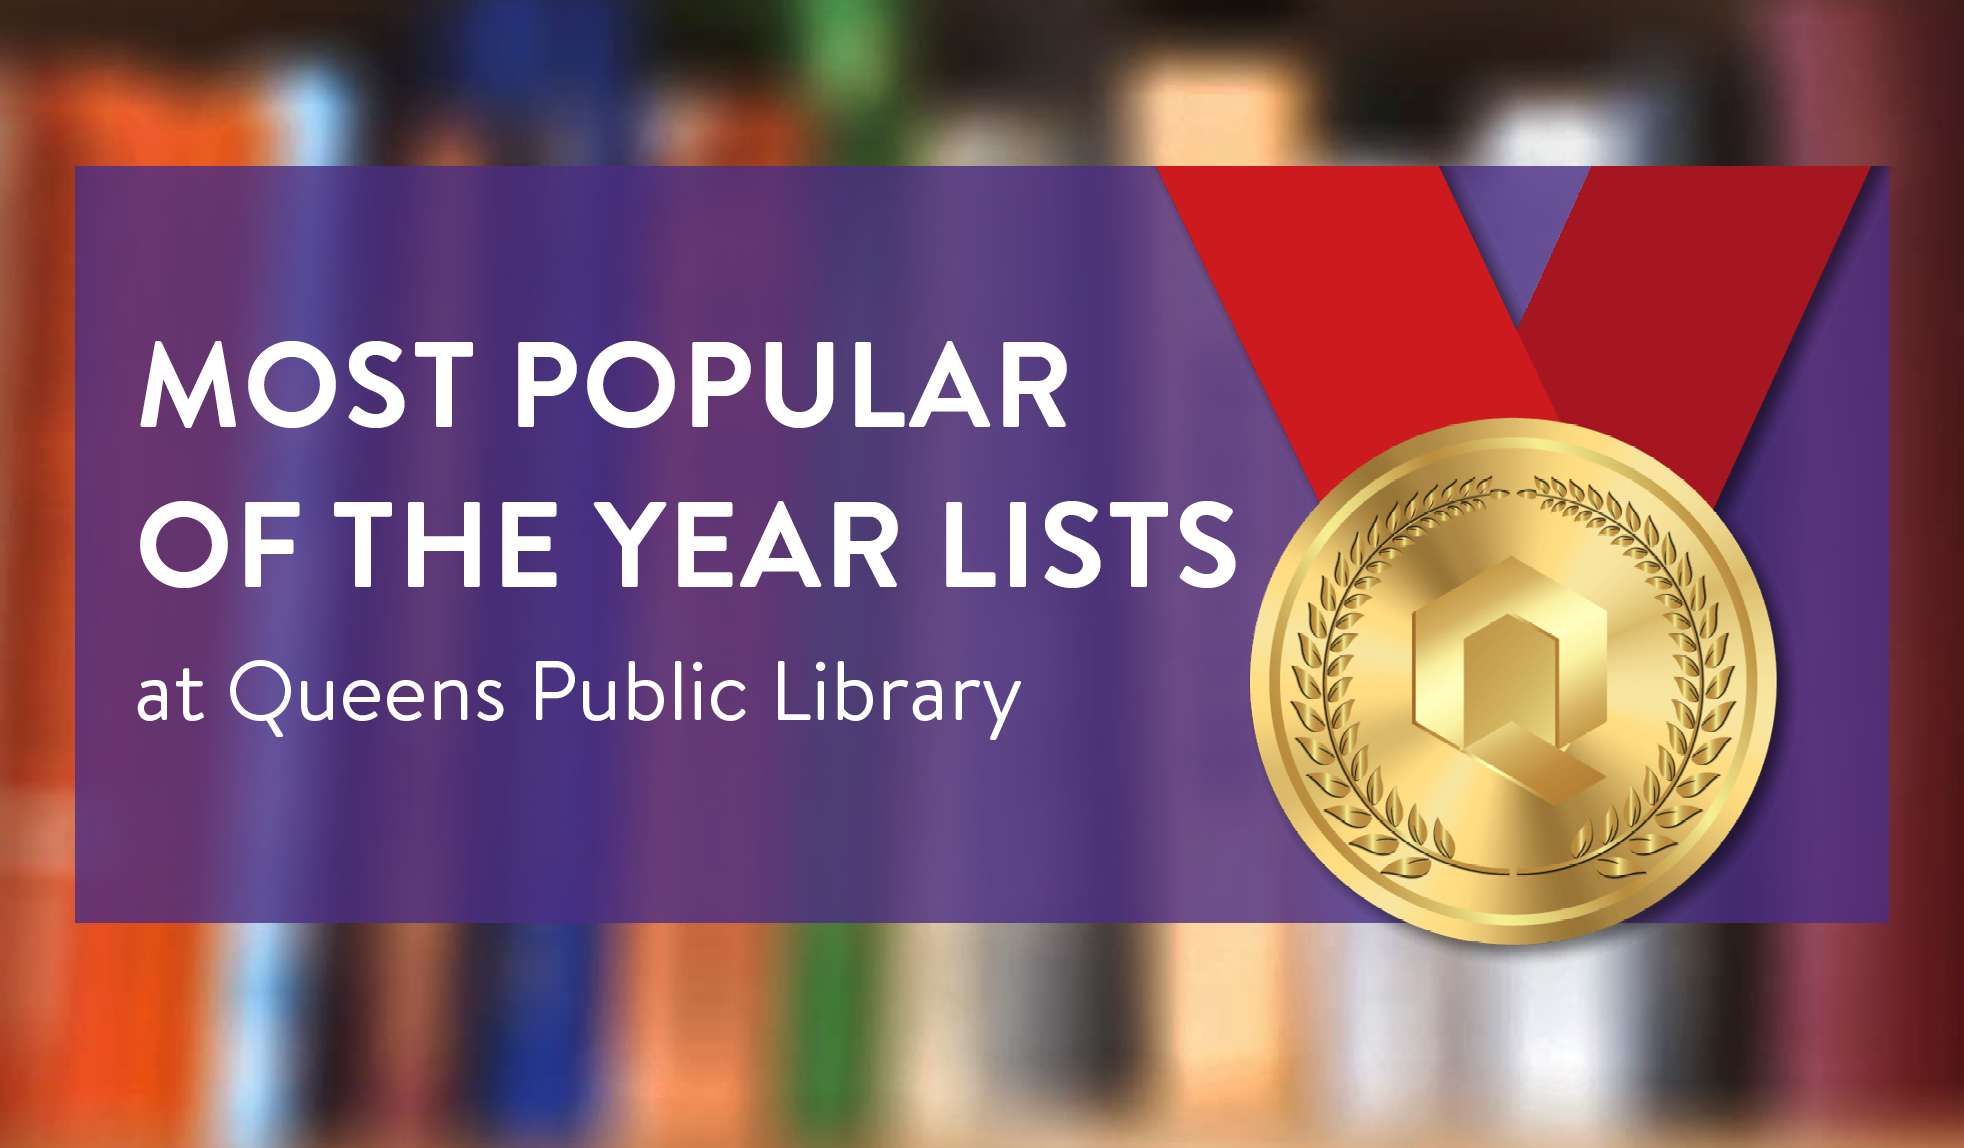 What were the most popular books, songs, eMagazines, and videos at QPL in 2021?